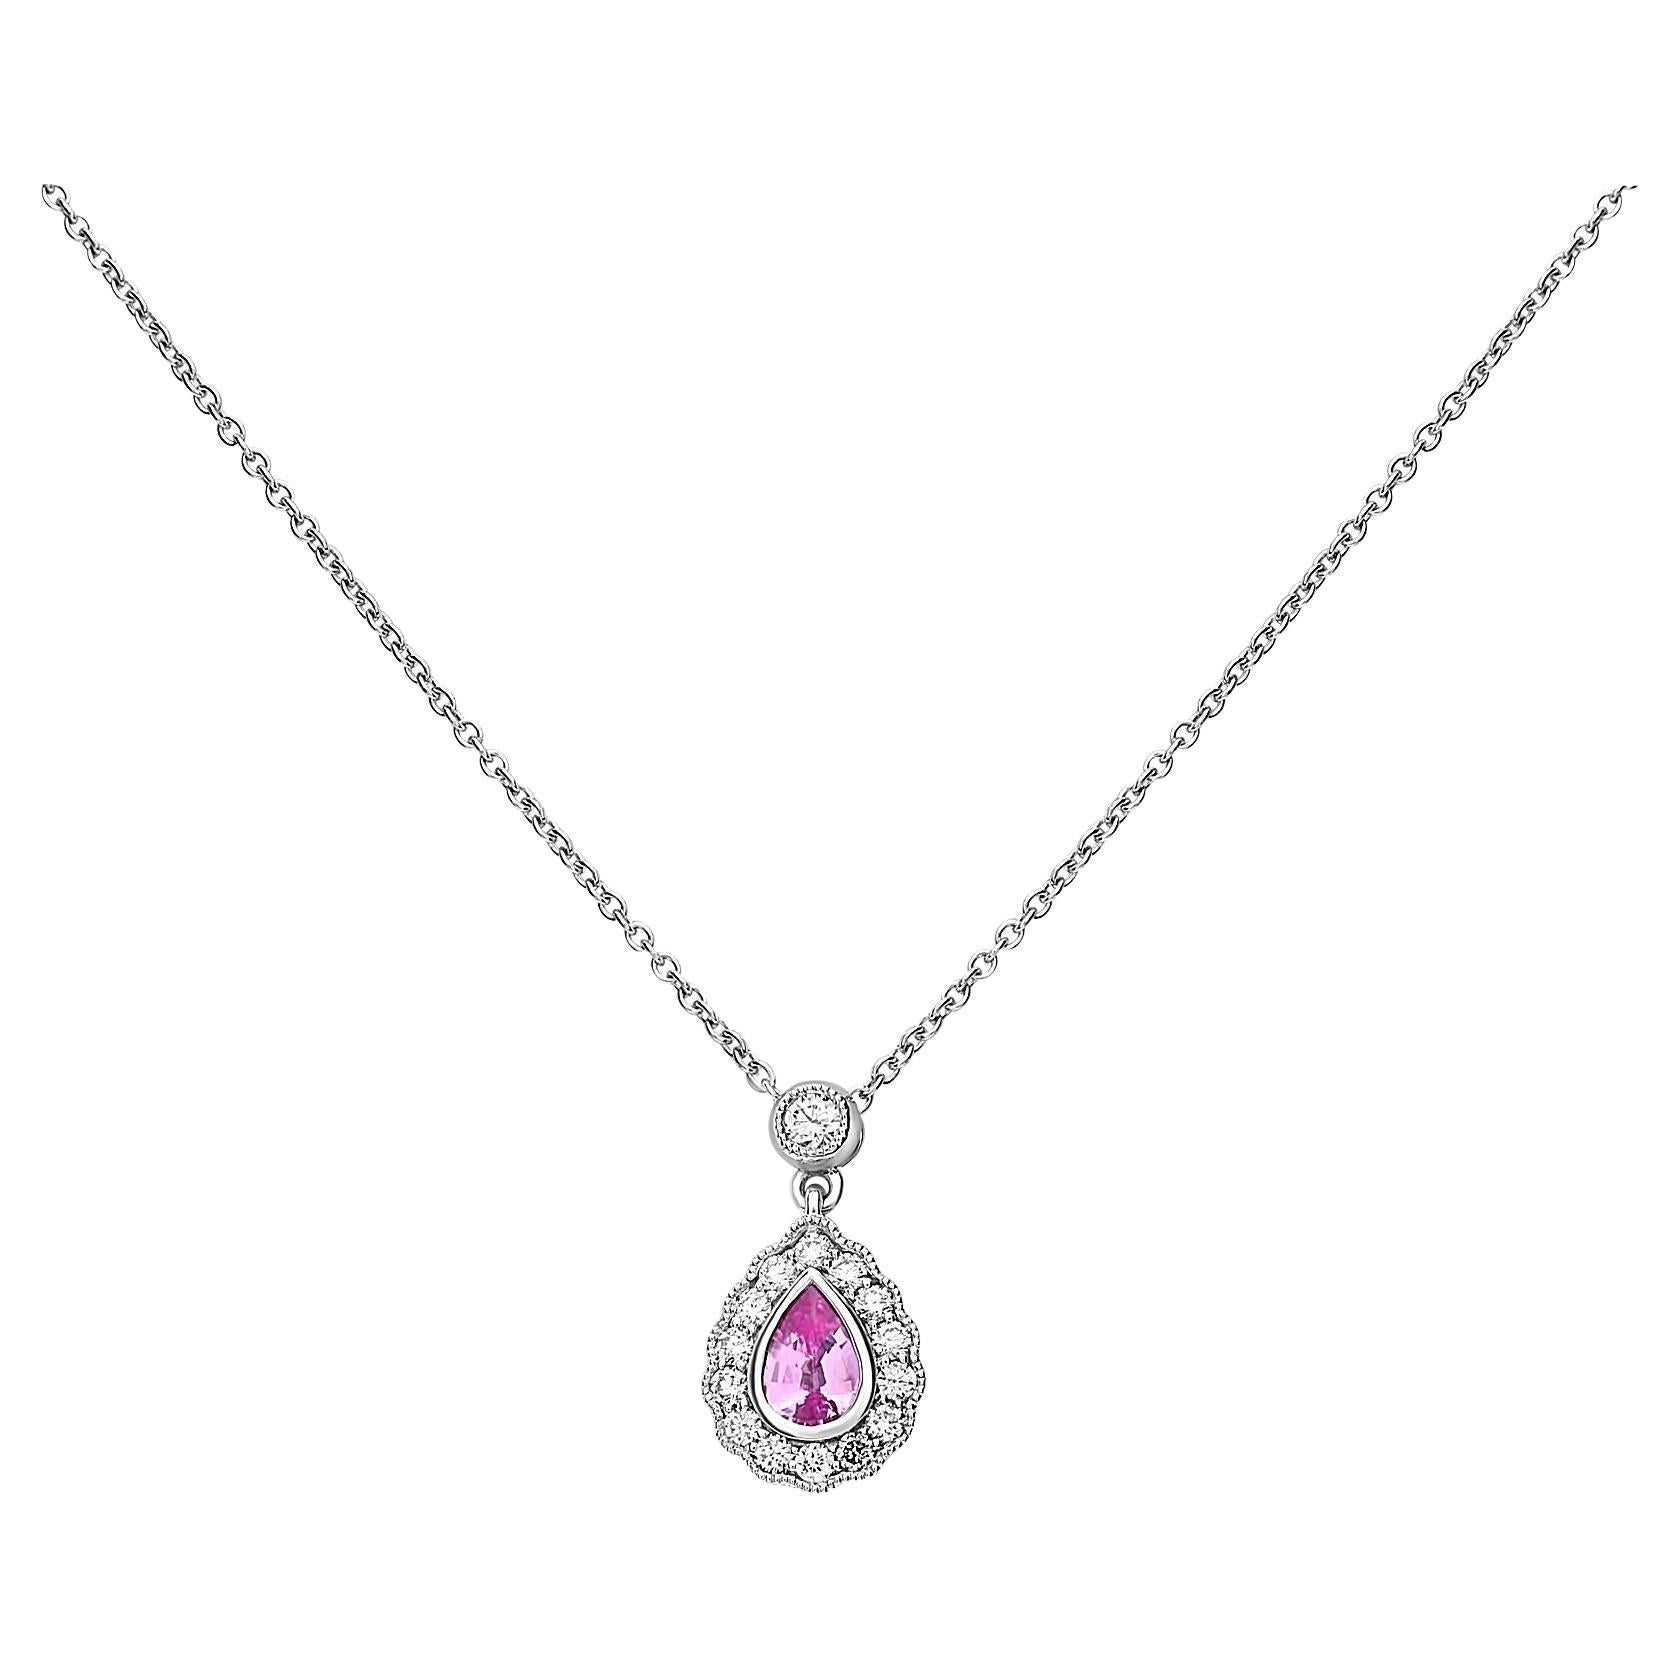 Pear-Shaped Pink Sapphire, White Diamond, and 18 Karat White Gold Halo Necklace